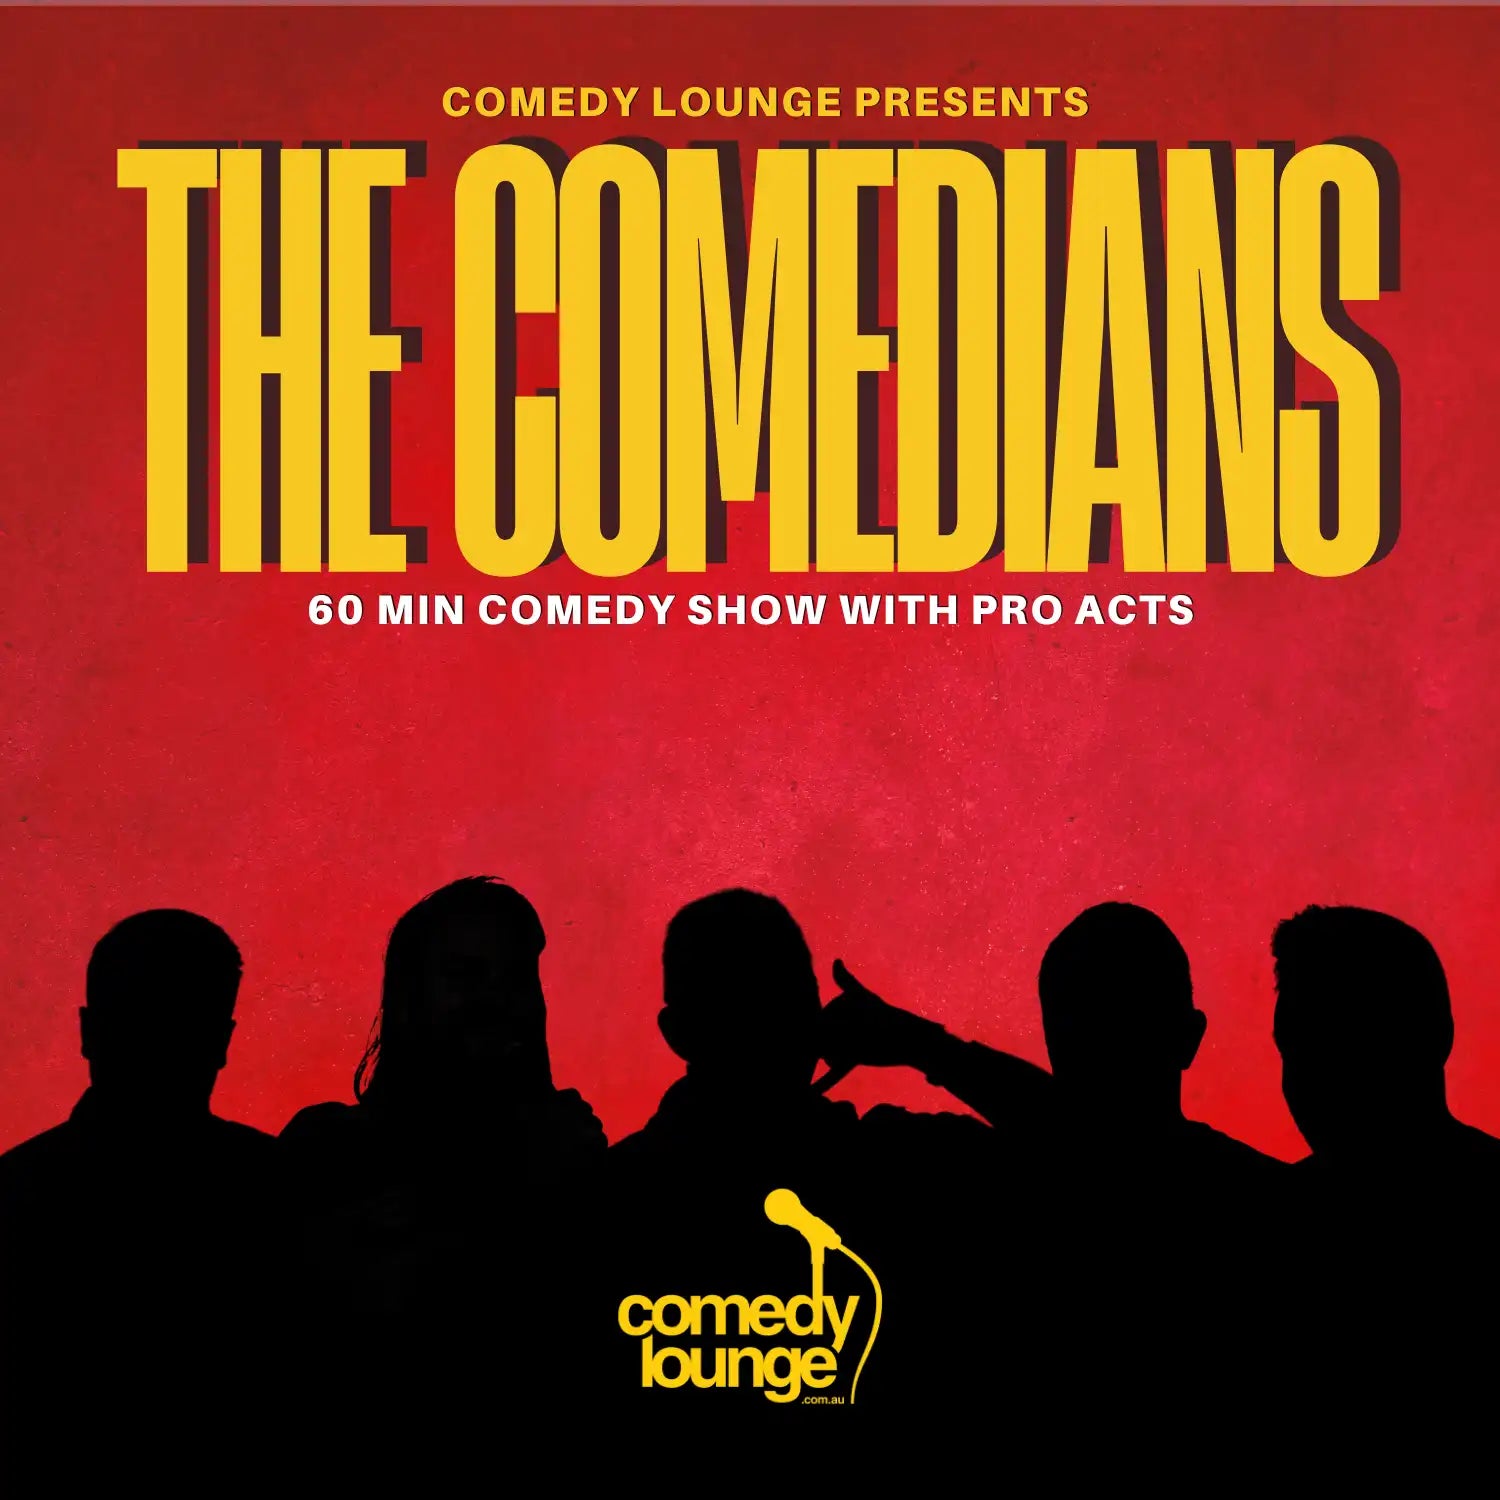 Mobile poster for 'The Comedians' Saturday show at Comedy Lounge Perth, featuring a lineup of top local and international stand-up comedians.